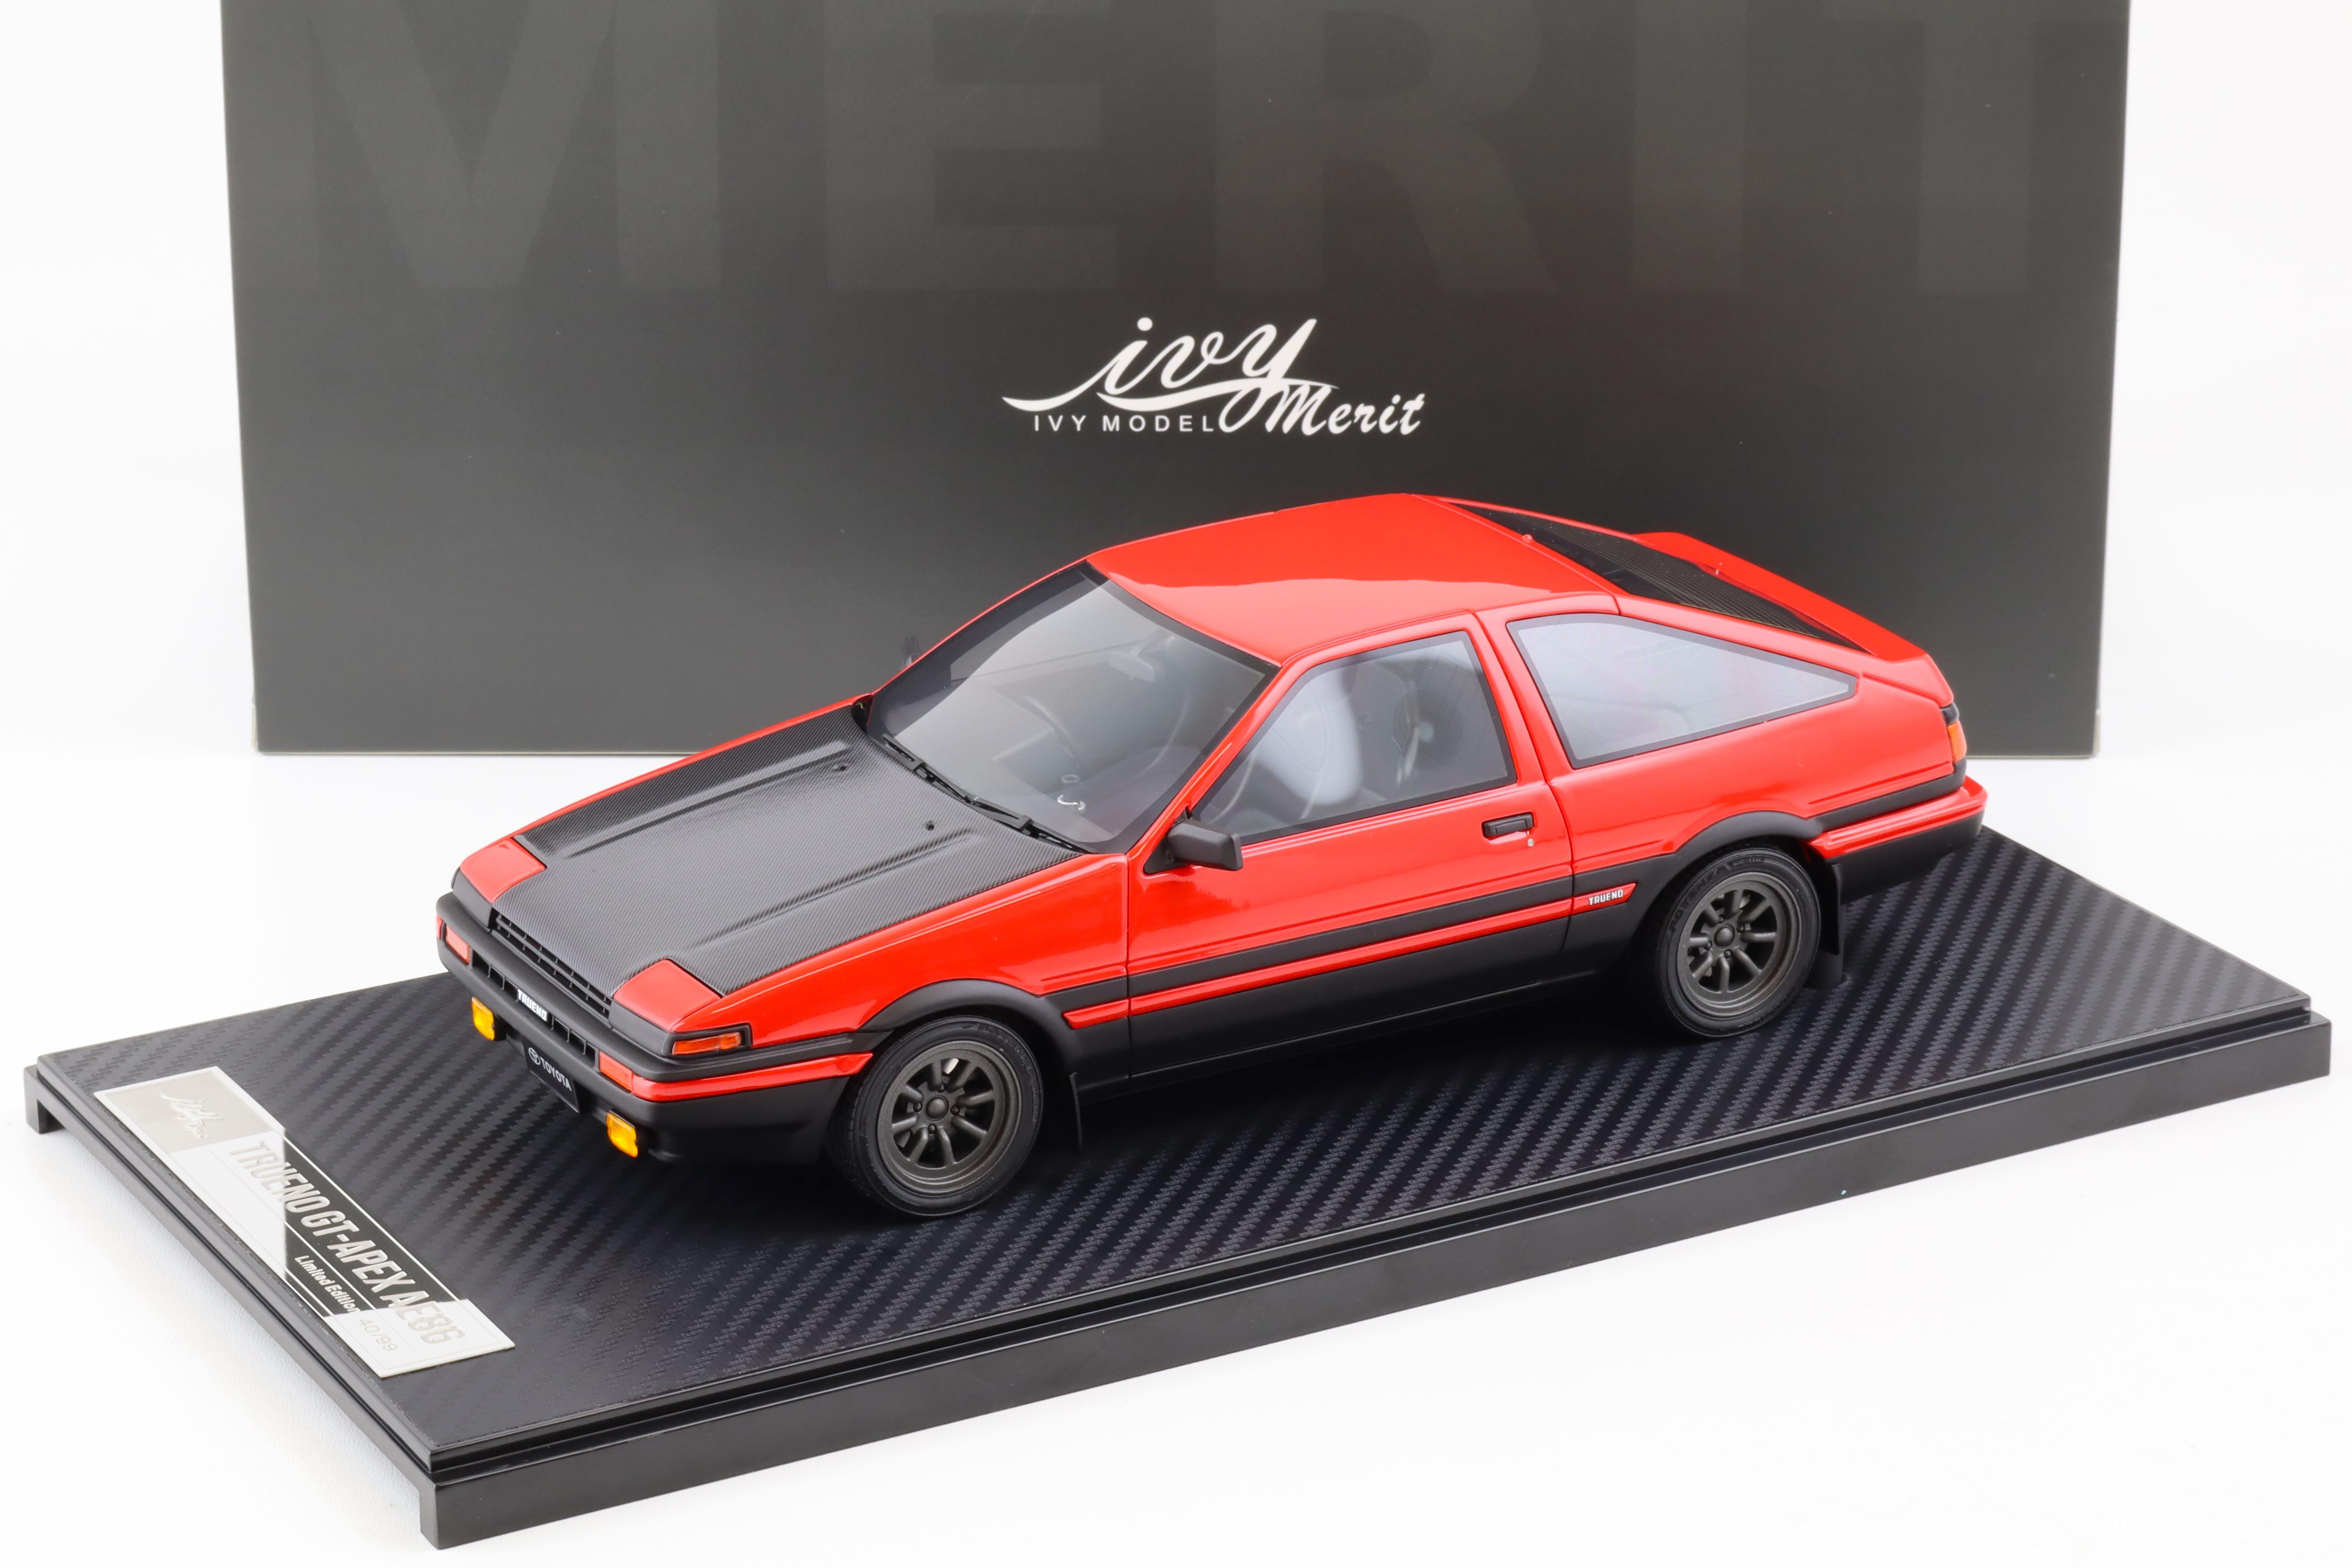 1:18 Ivy Model Merit Toyota Trueno GT-APEX AE86 red with Carbon hood - Limited 99 pcs.